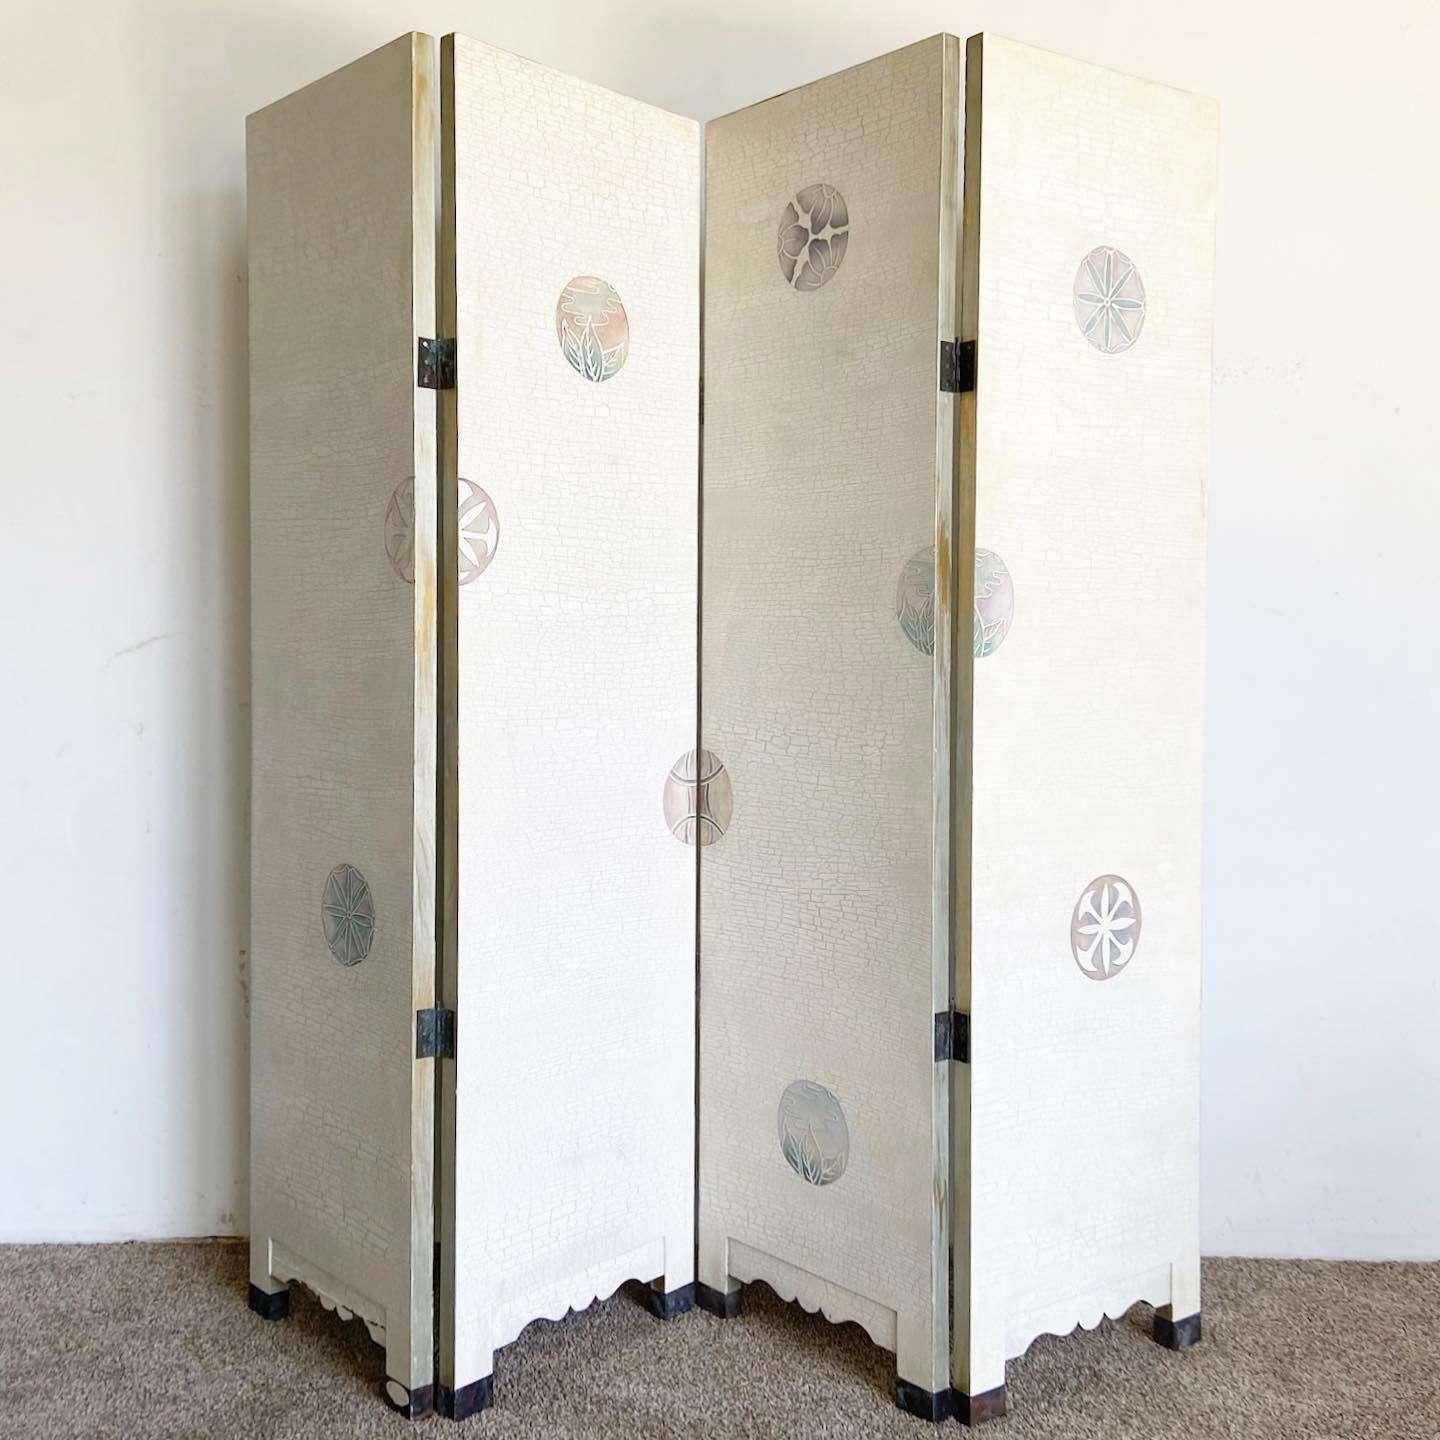 Chinese Hand Carved and Painted Native Tribal Room Divider - 4 Panels In Good Condition For Sale In Delray Beach, FL